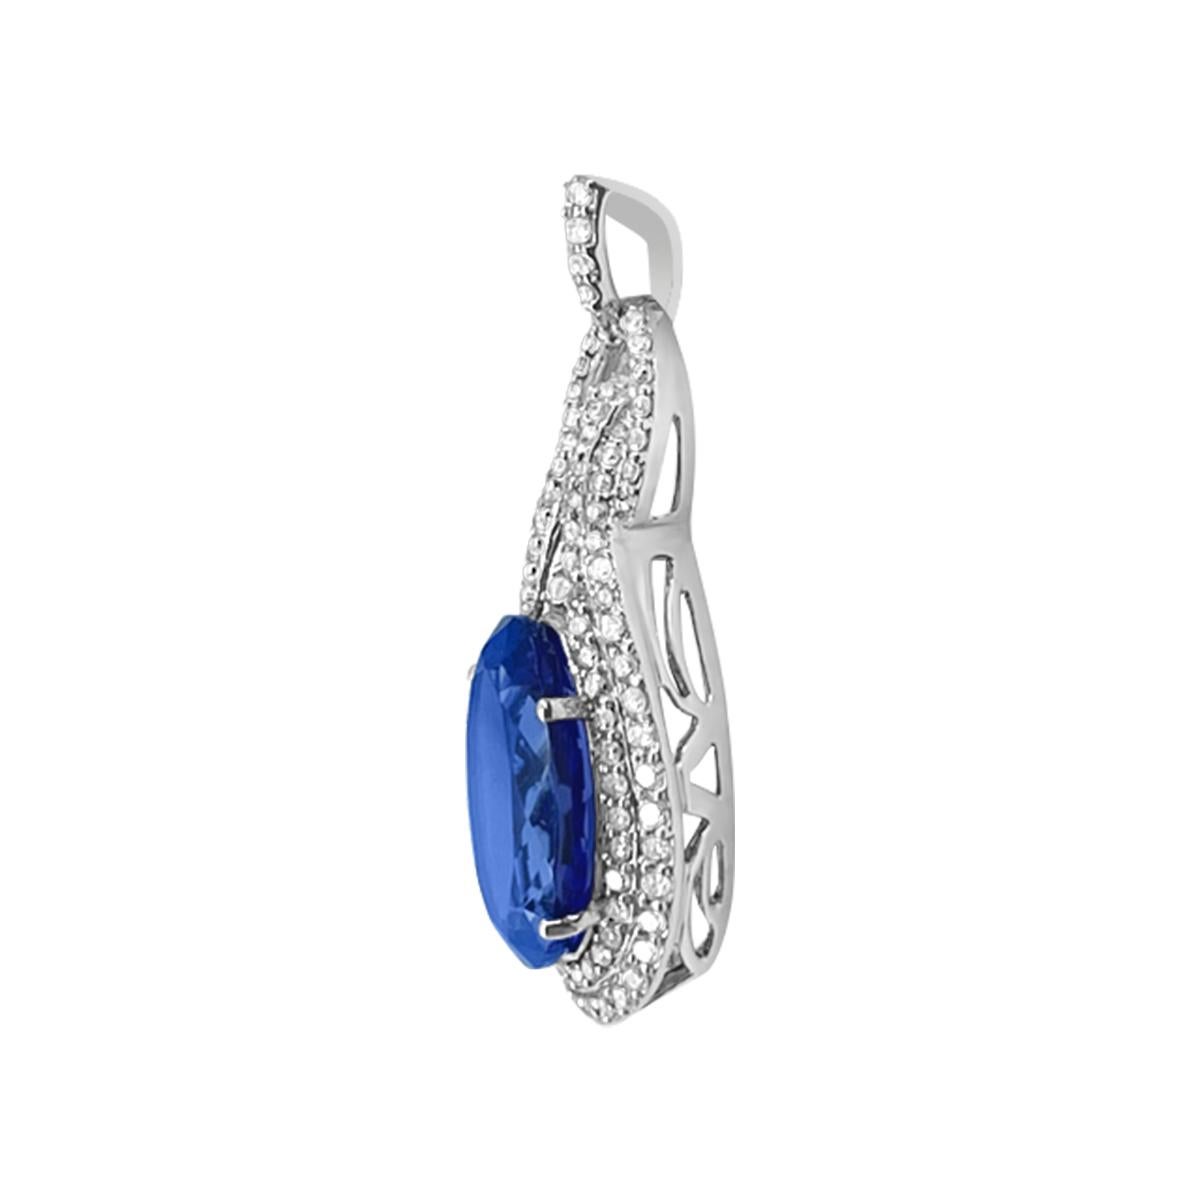 Modern 14K White Gold 6.70cts Tanzanite and Diamond Pendant. Style# P6611 For Sale